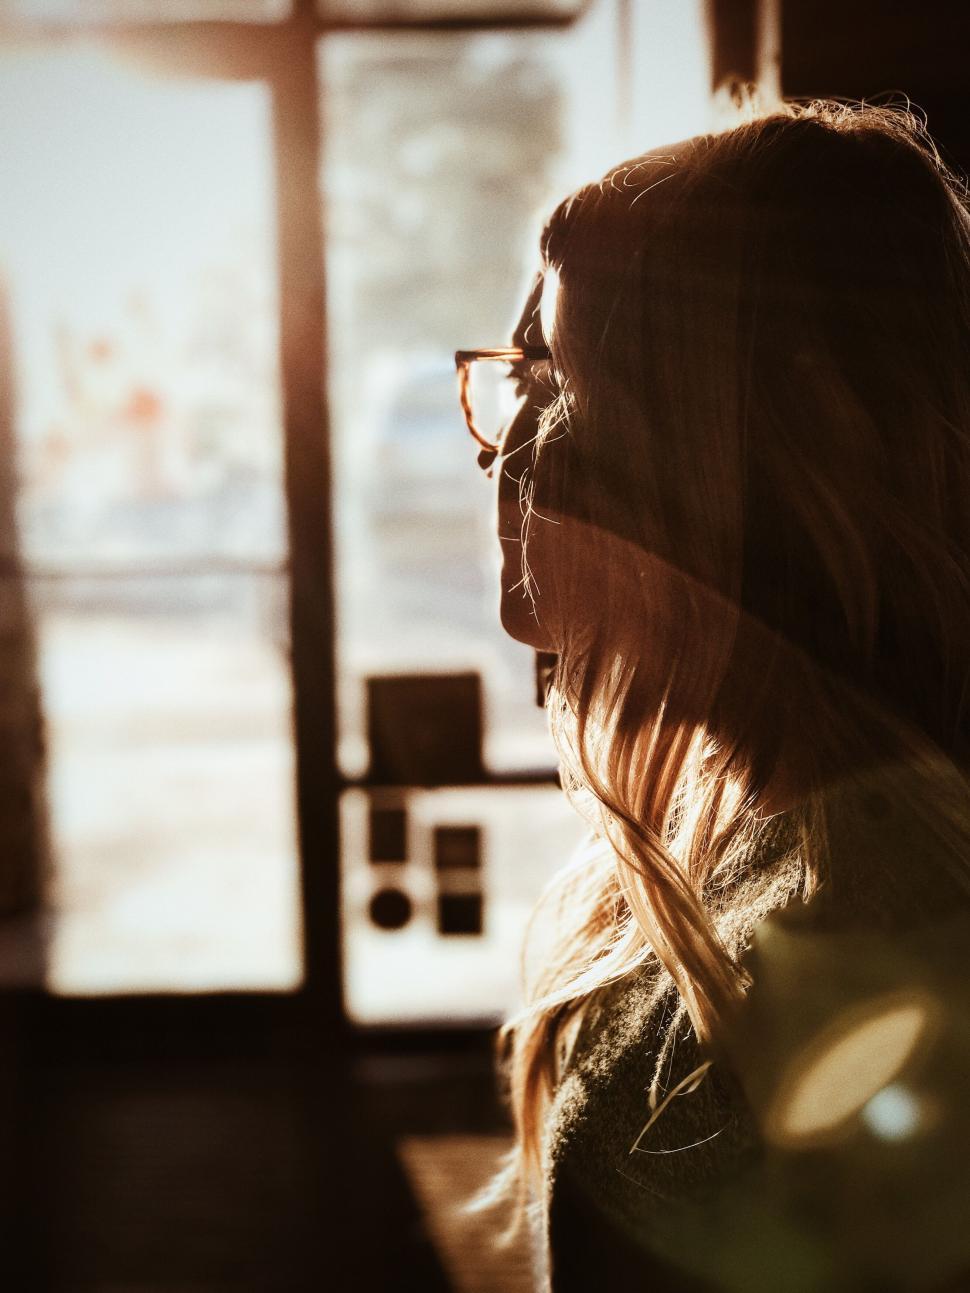 Free Image of Backlit profile of a woman with eyeglasses 